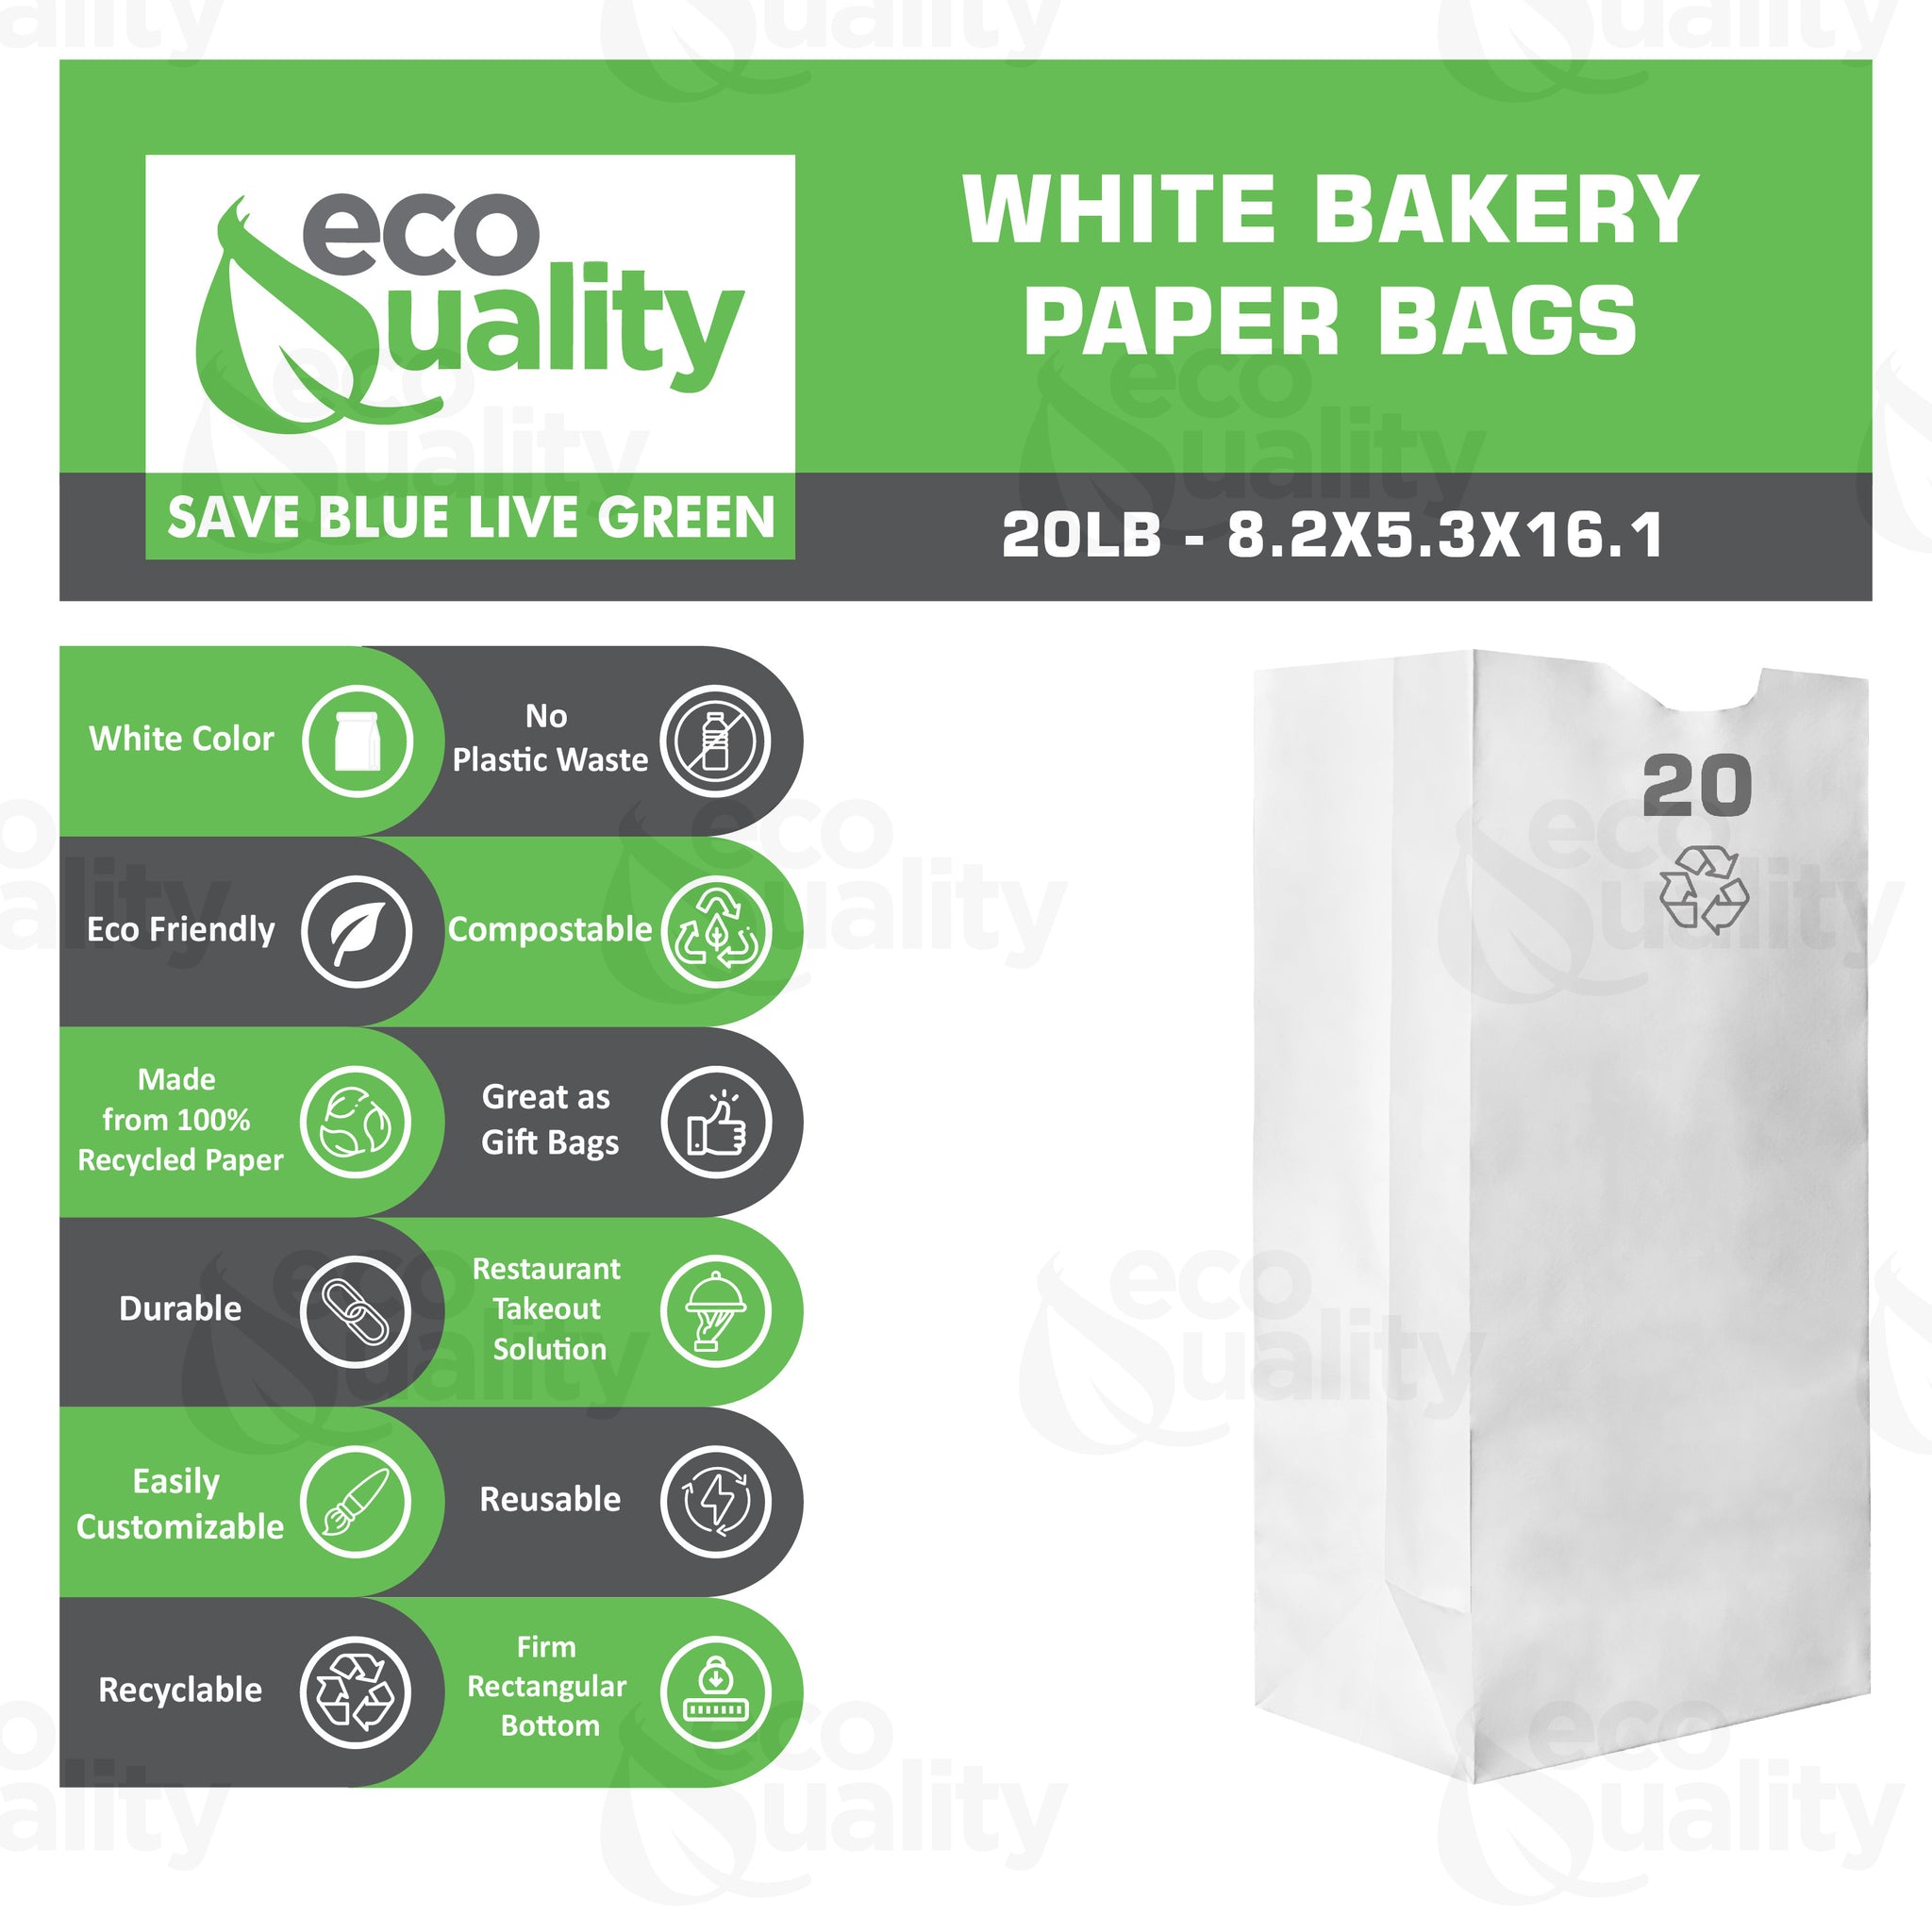 disposable bag White Paper Bags white Paper Shopping Bags foldable paper bag catering bags white kraft paper bag 1 pound candy bag snack bag gift bags DIY Bags arts and craft Sandwich Bag white paper bag party favor bag lunch bag togo bag takeout bag Restaurant supplies paper bakery bags Kraft Paper Bags kraft grocery bags supermarket Household Supplies hero bread tall long paper bag 20 pound